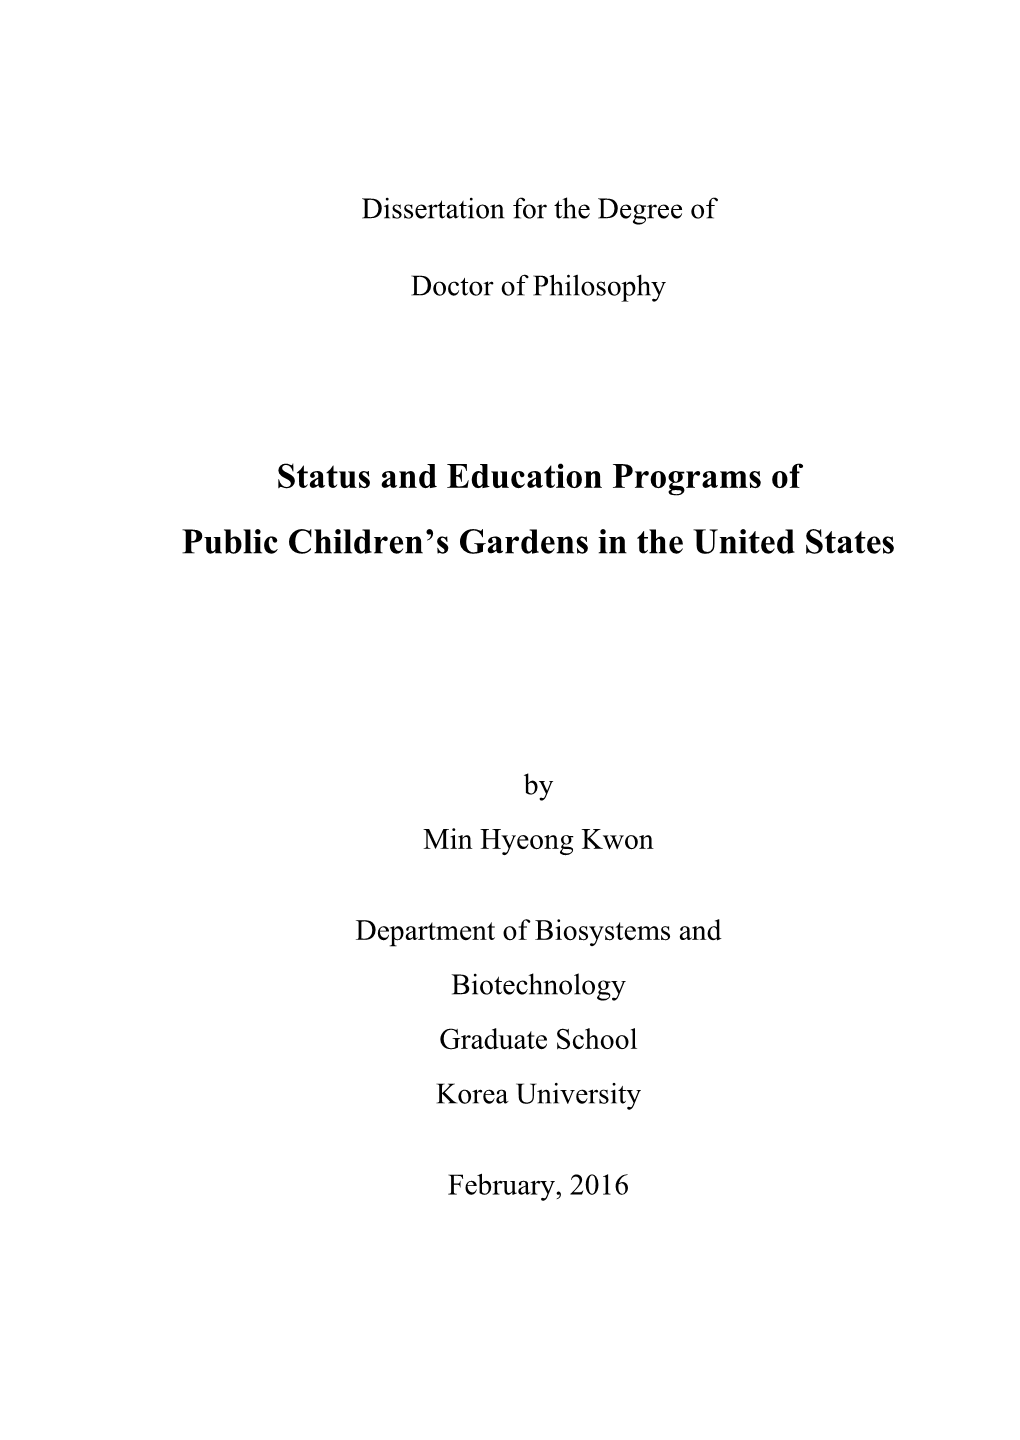 Status and Education Programs of Public Children's Gardens in The